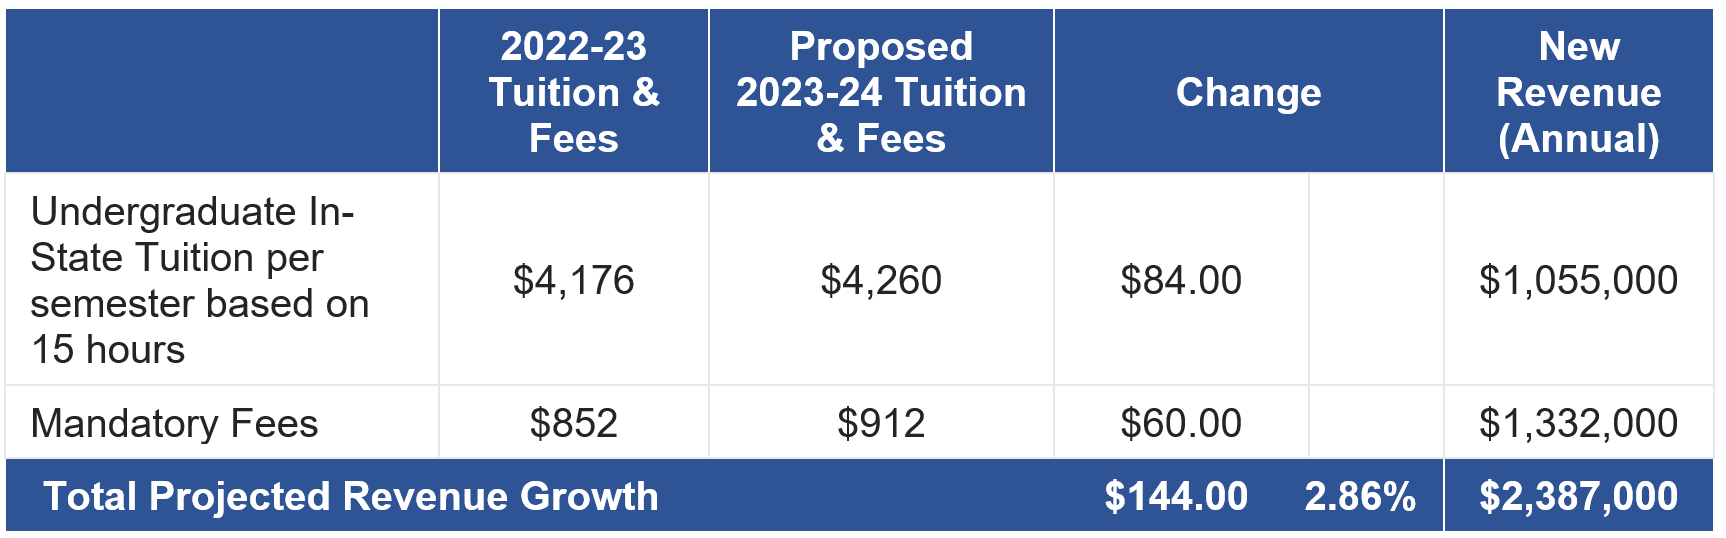 2022-23 Undergraduate Tuition and Fee Increase Proposal